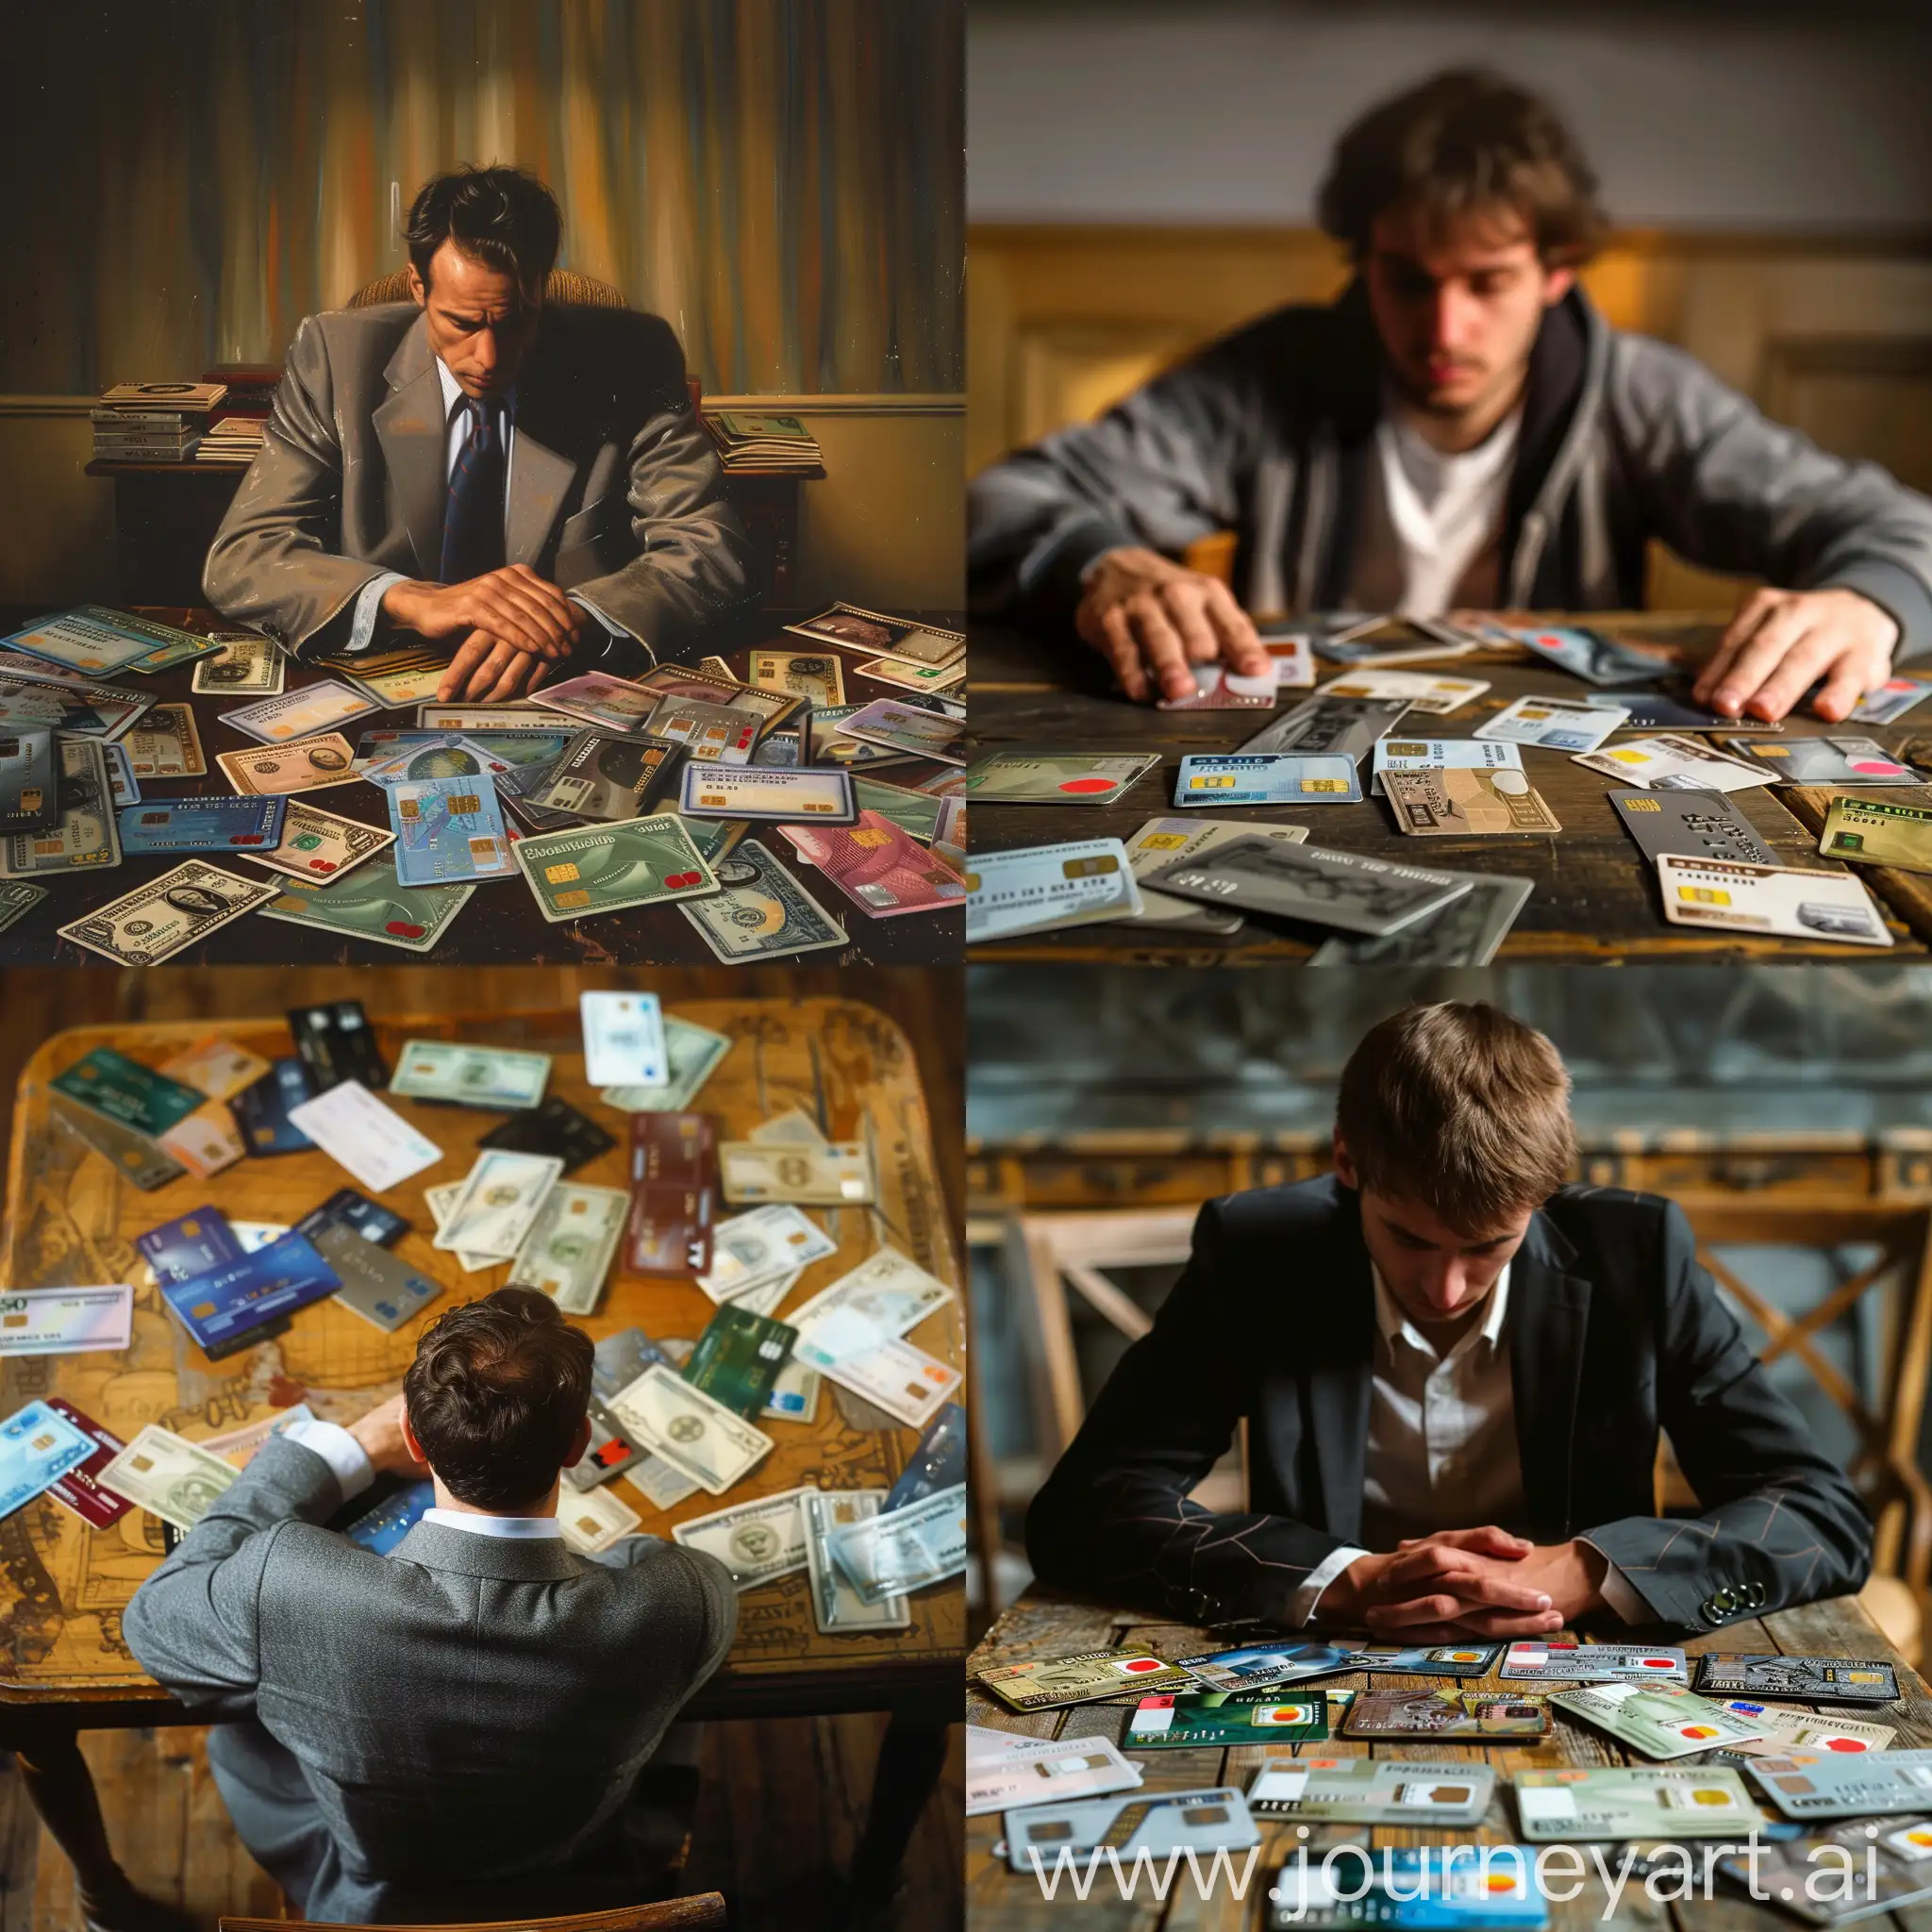 Man-with-Multiple-Bank-Cards-Sitting-at-Table